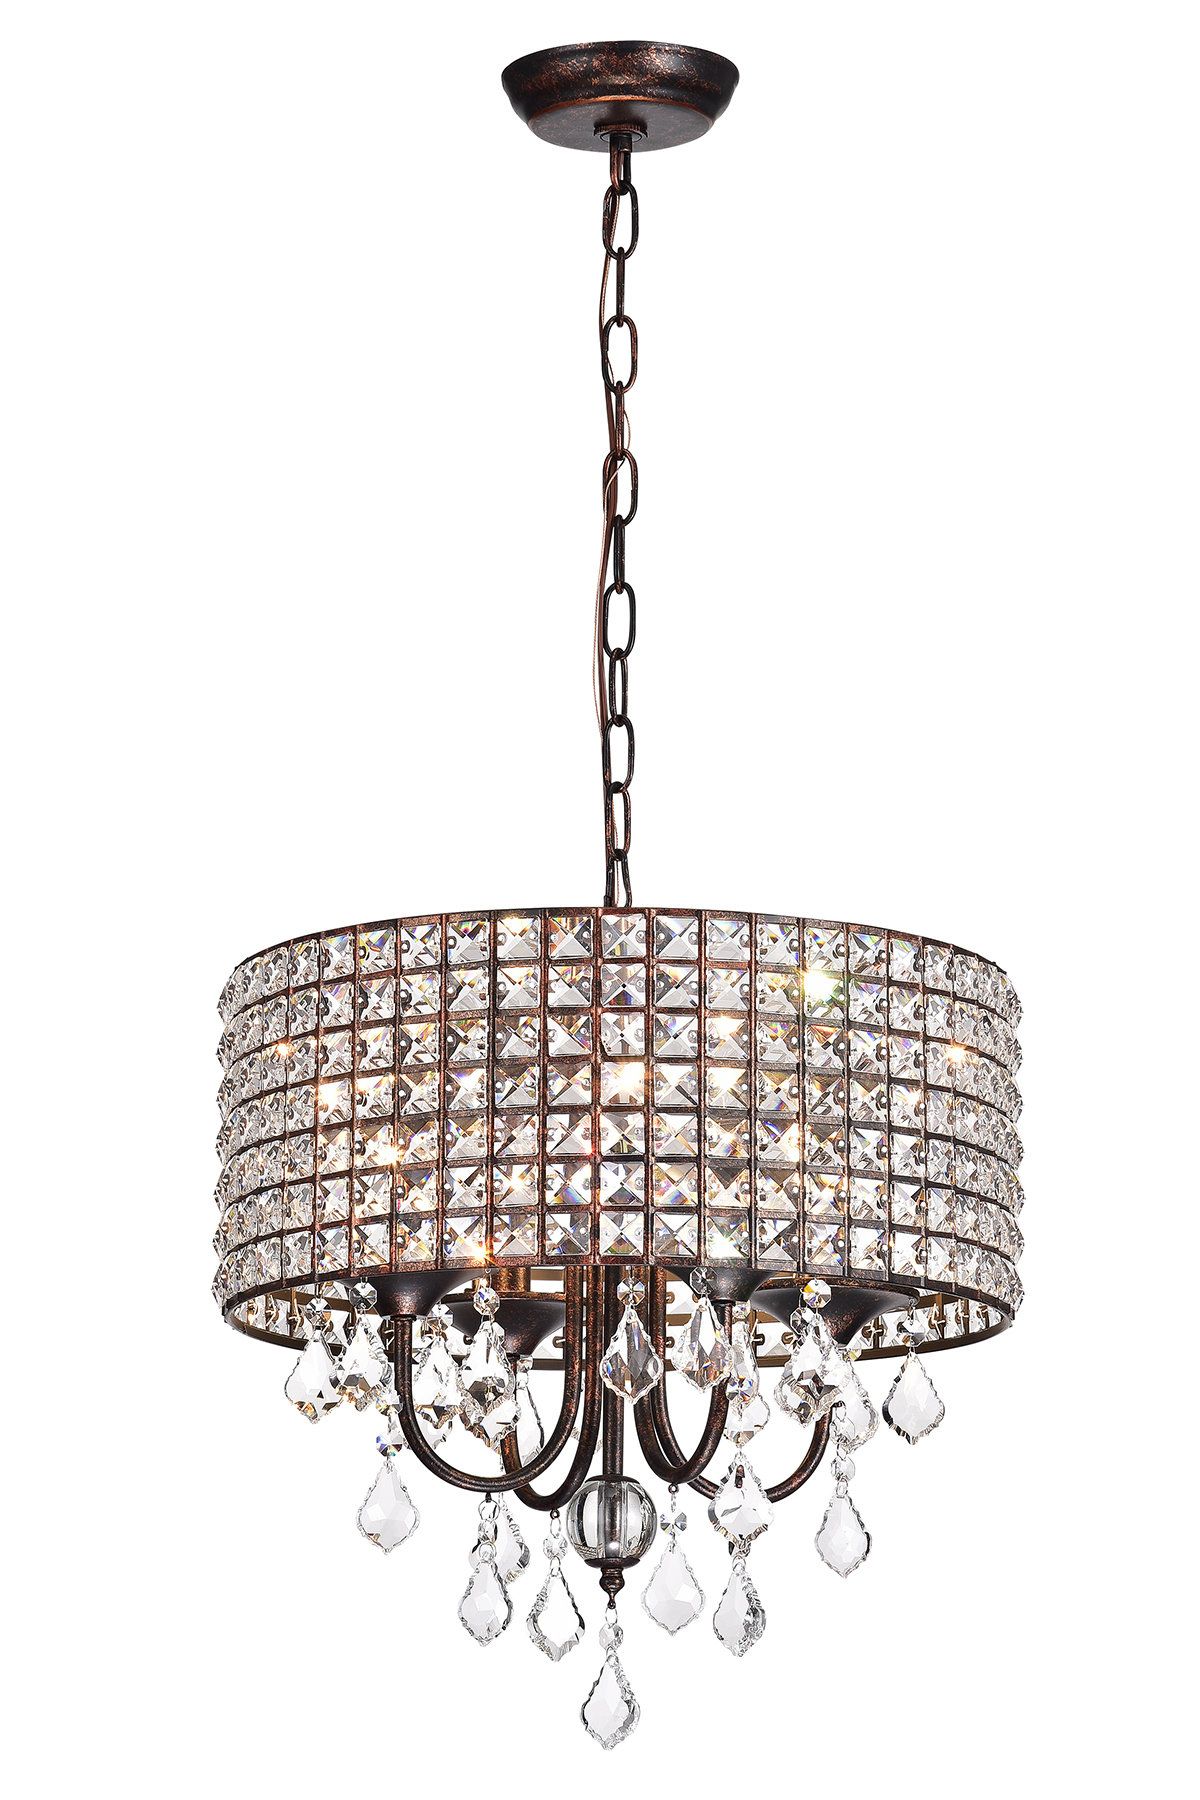 Lavada 4 Light Drum Chandelier Intended For Mckamey 4 Light Crystal Chandeliers (View 15 of 30)